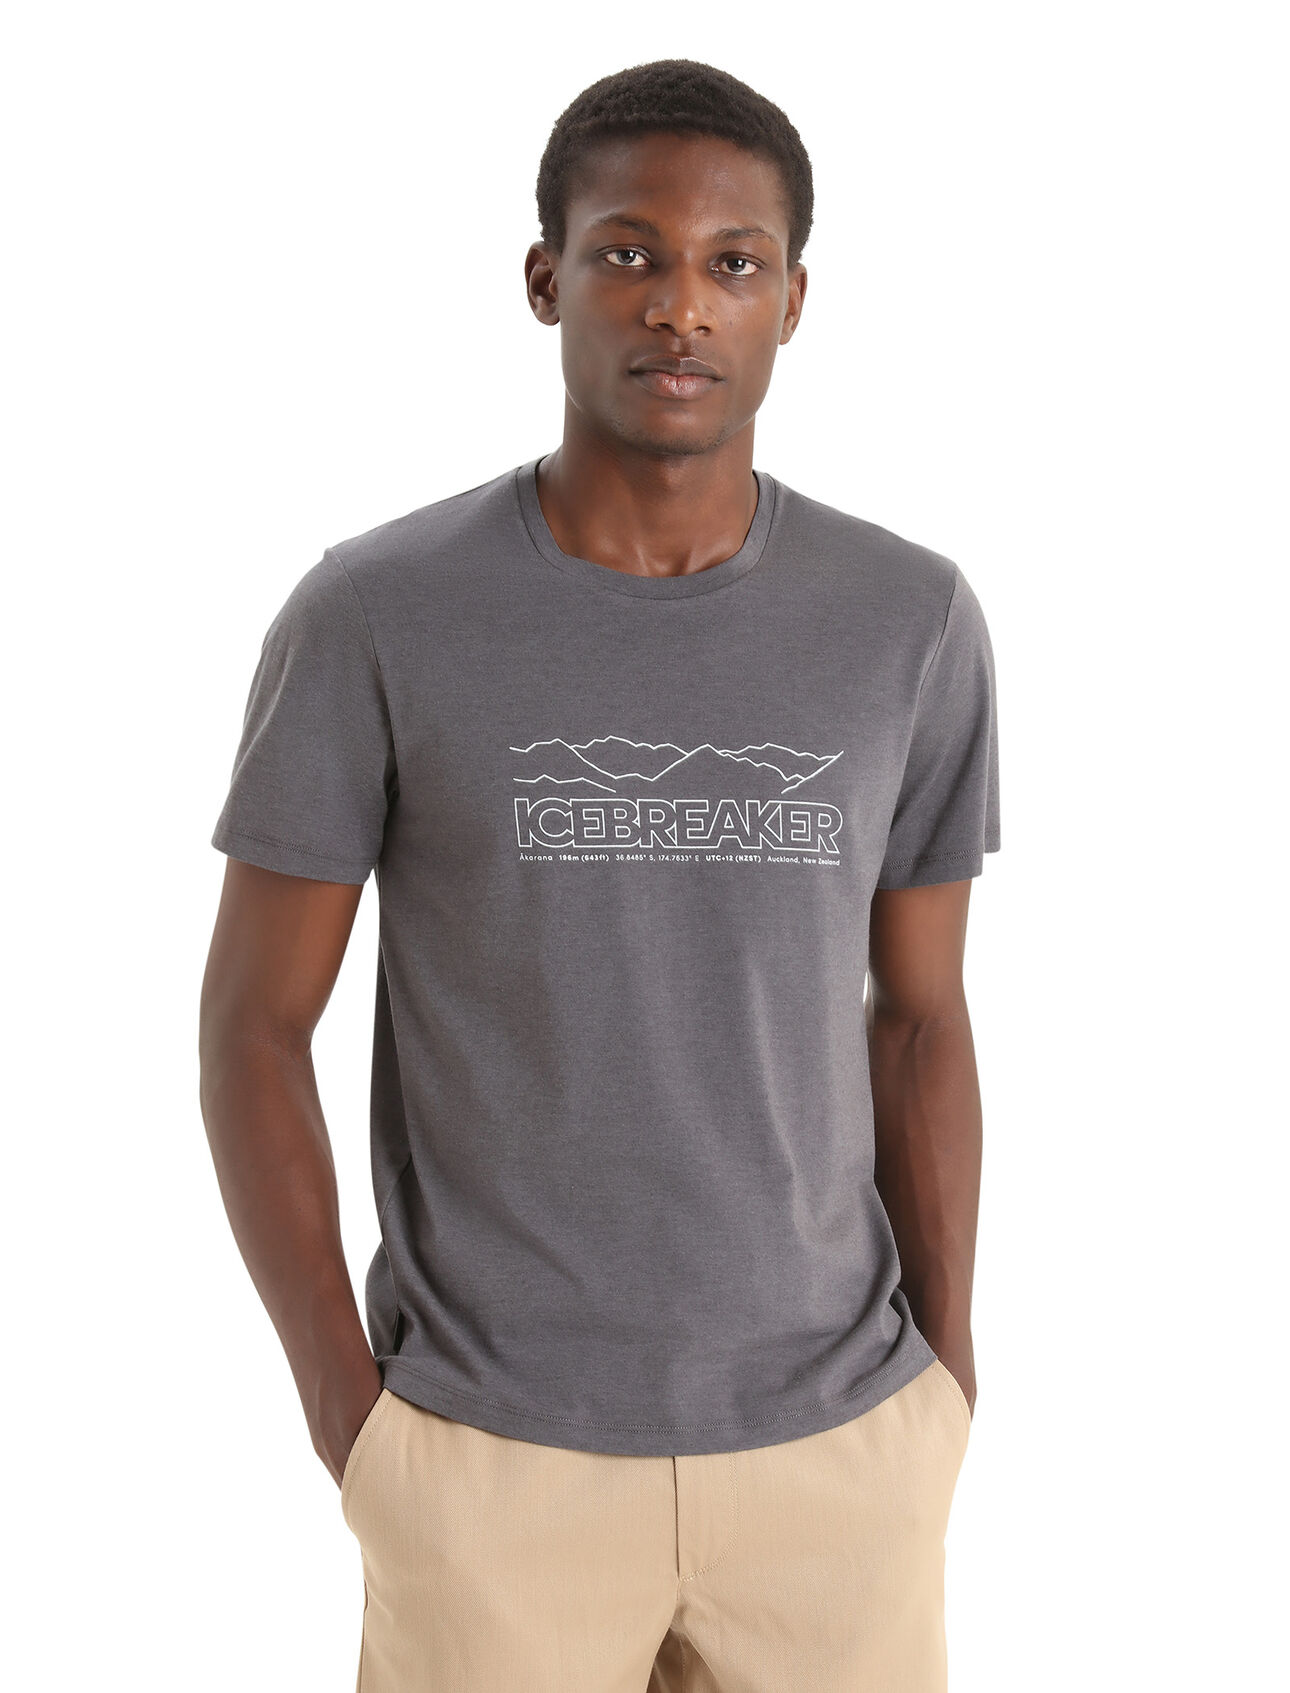 Mens Merino Central Classic Short Sleeve T-Shirt Icebreaker Story A clean, classic and comfortable everyday tee that blends natural merino wool with organically grown cotton, the Central Classic Short Sleeve Tee Icebreaker Story has you covered any day of the week. 